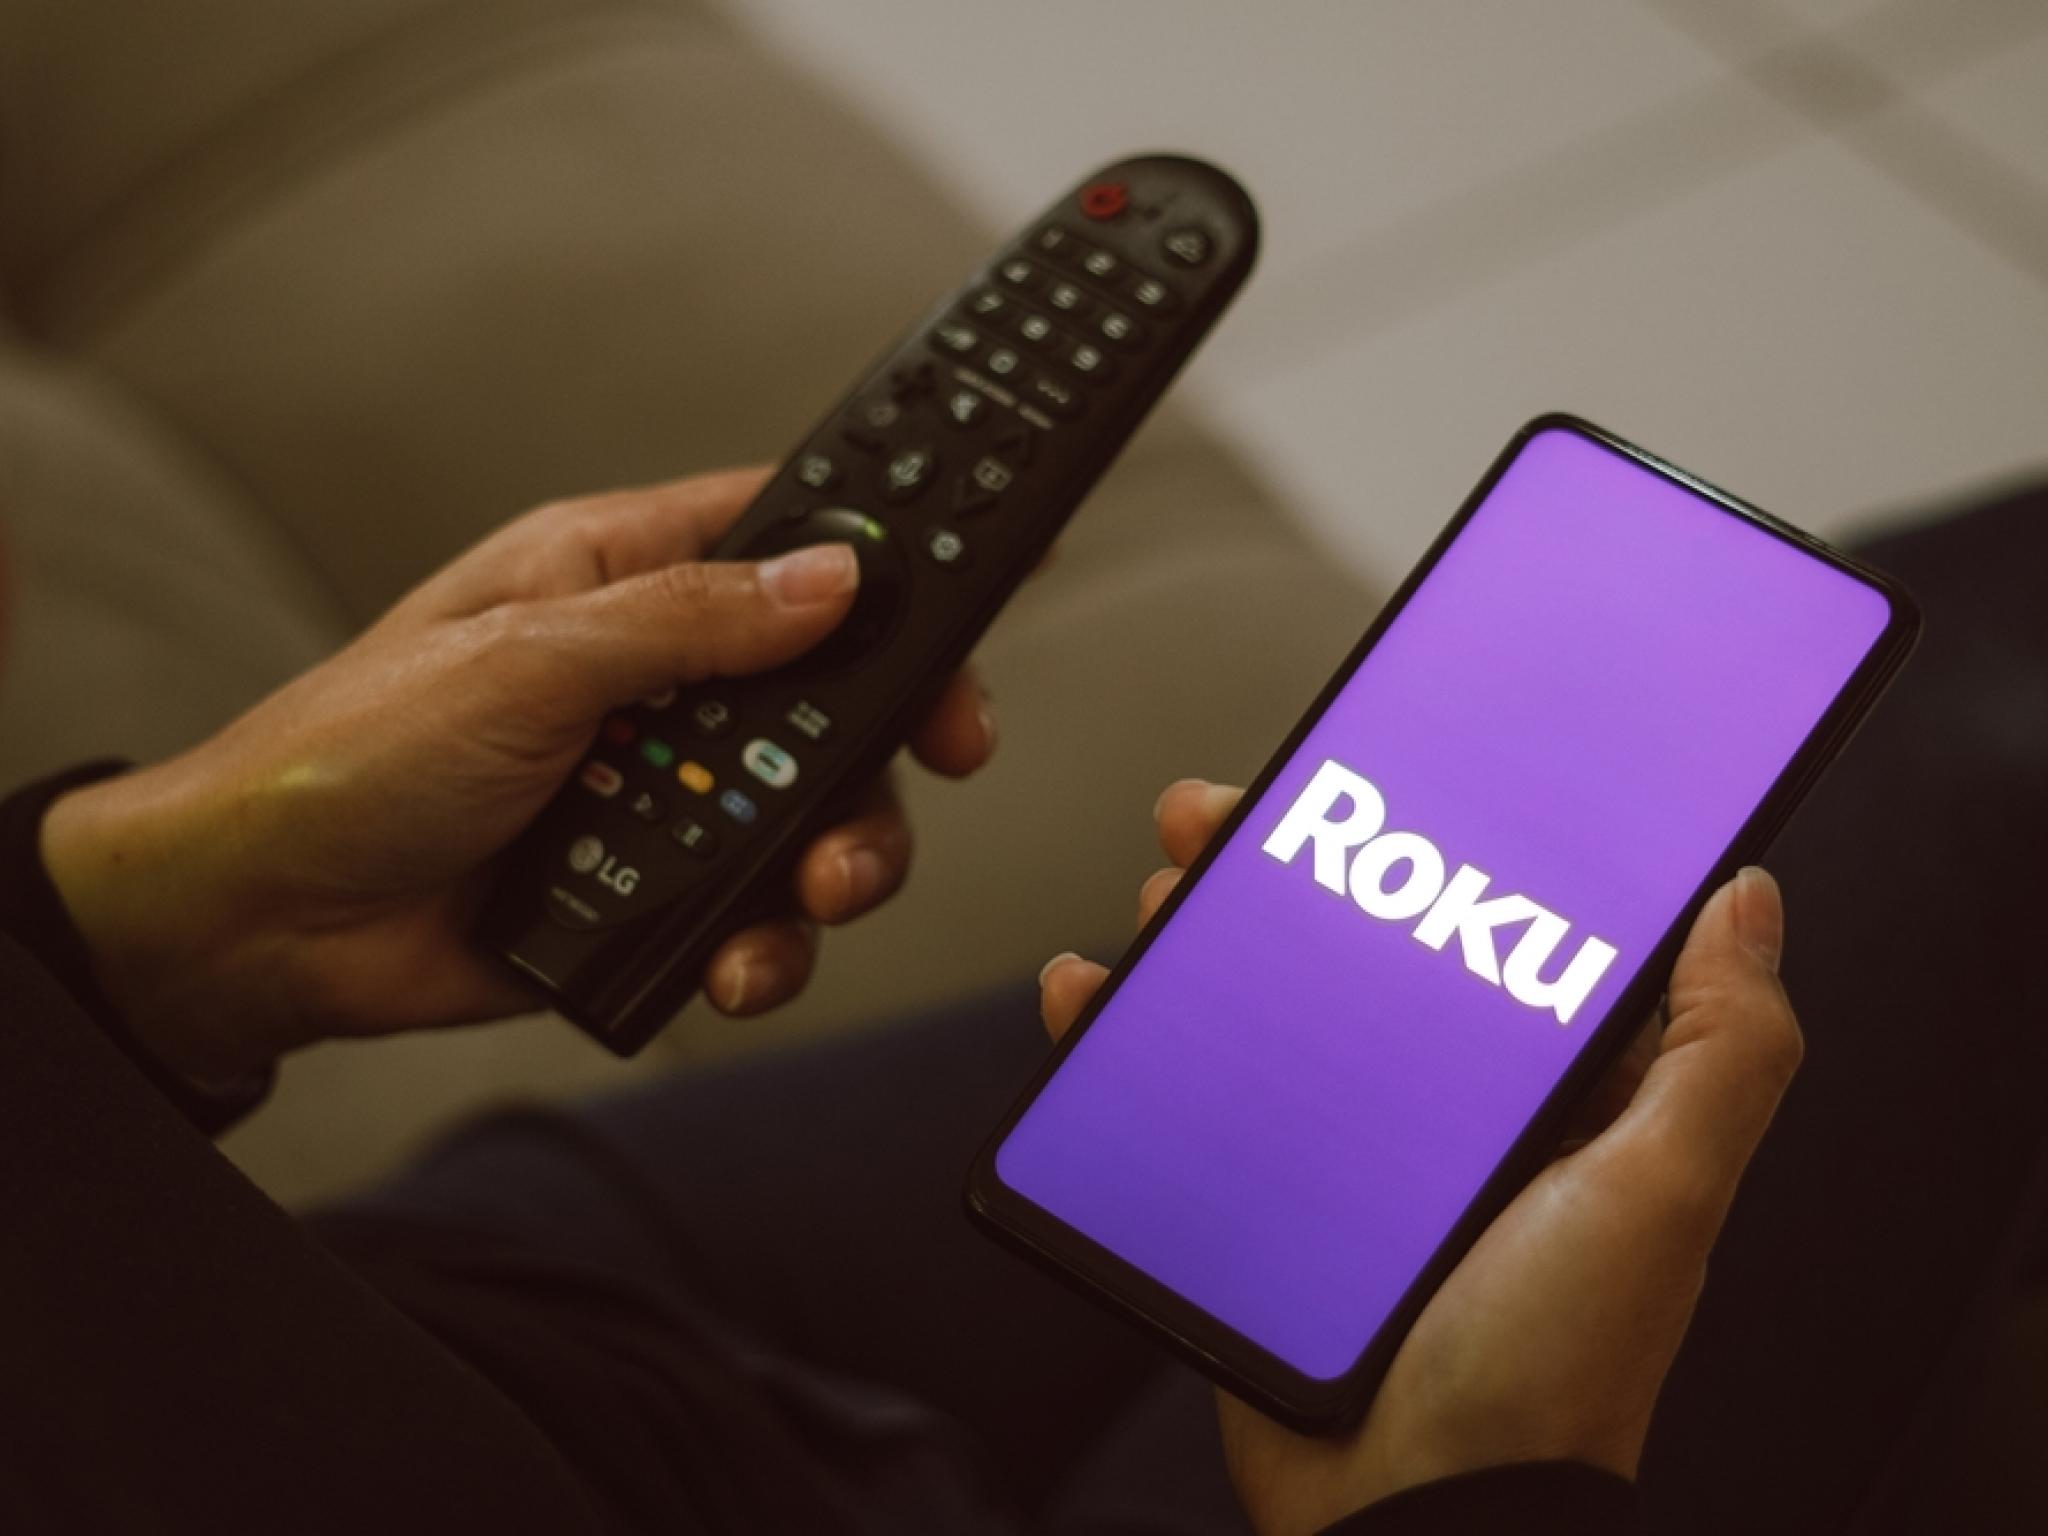  roku-analysts-vouch-for-the-must-advertise-platform-albeit-seek-revenue-upside-to-get-more-constructive 